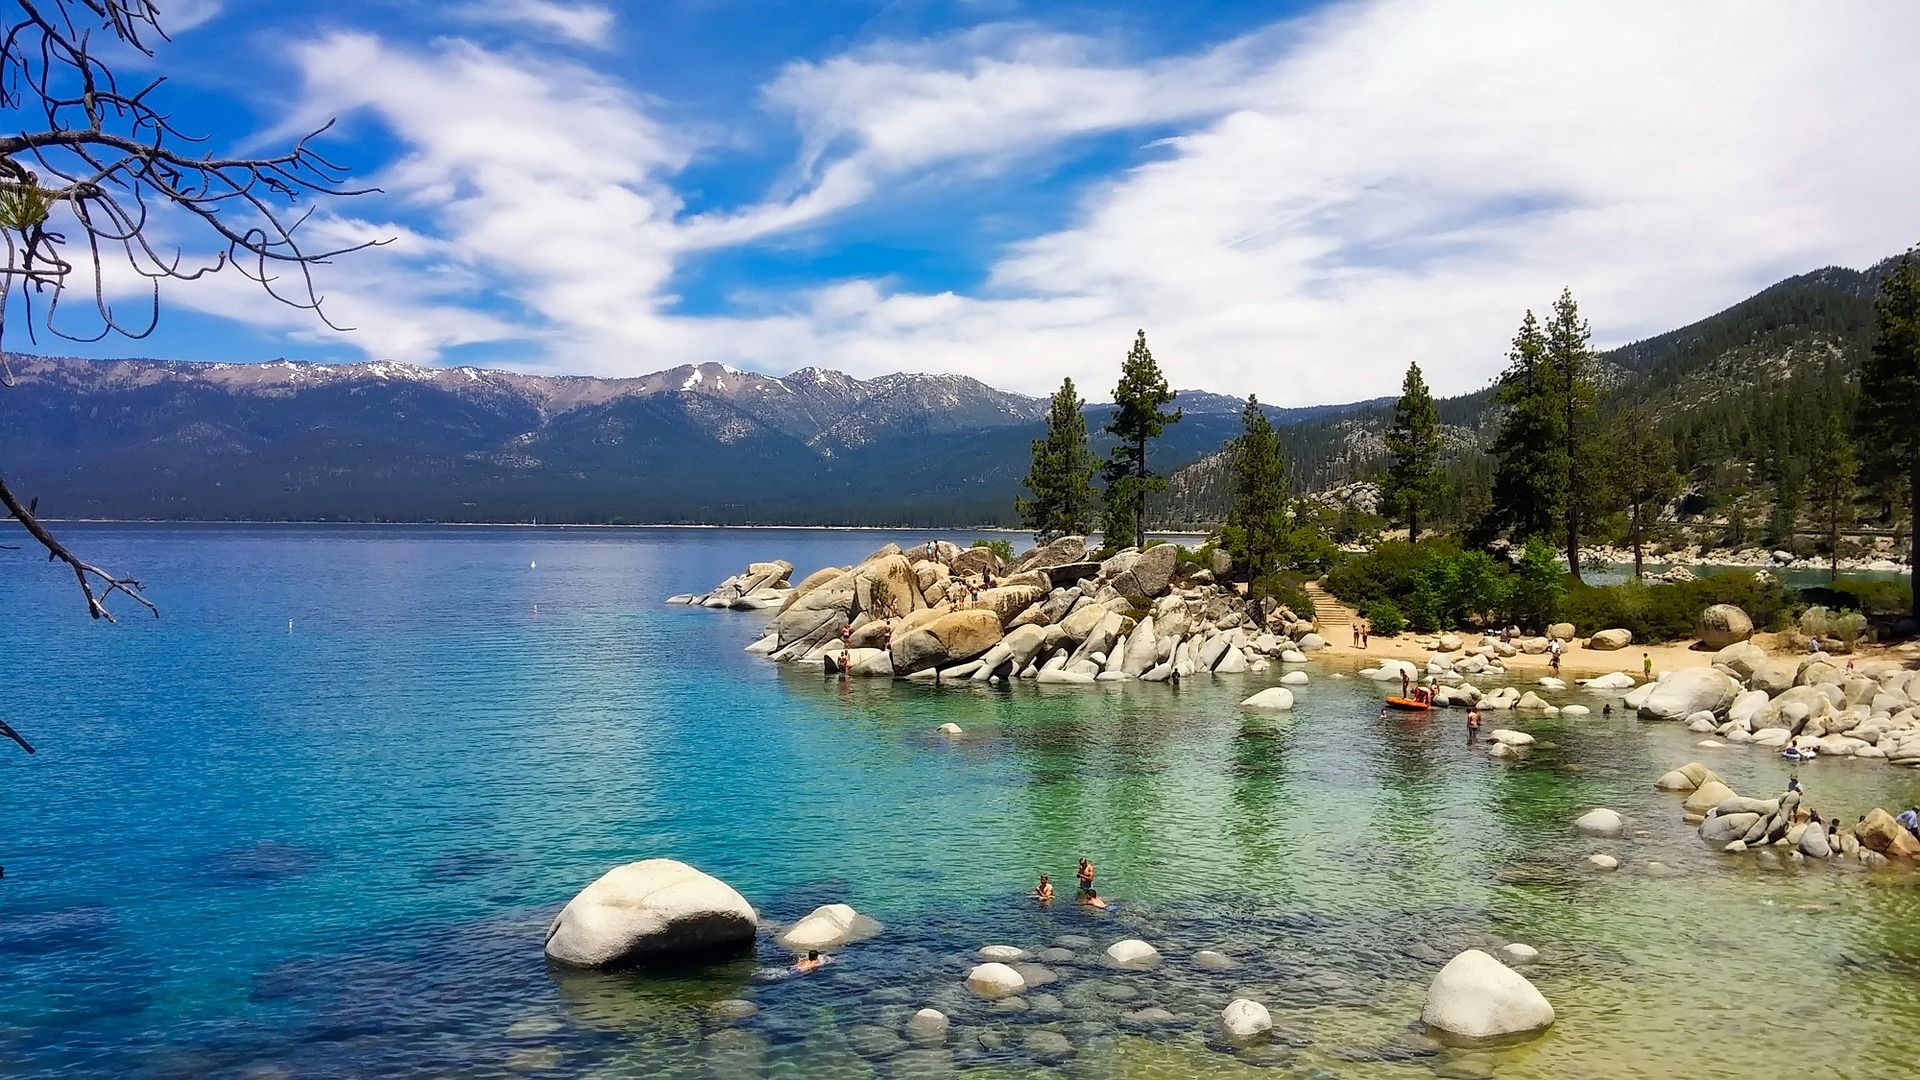 People paddling on the shore of Lake Tahoe in California, USA